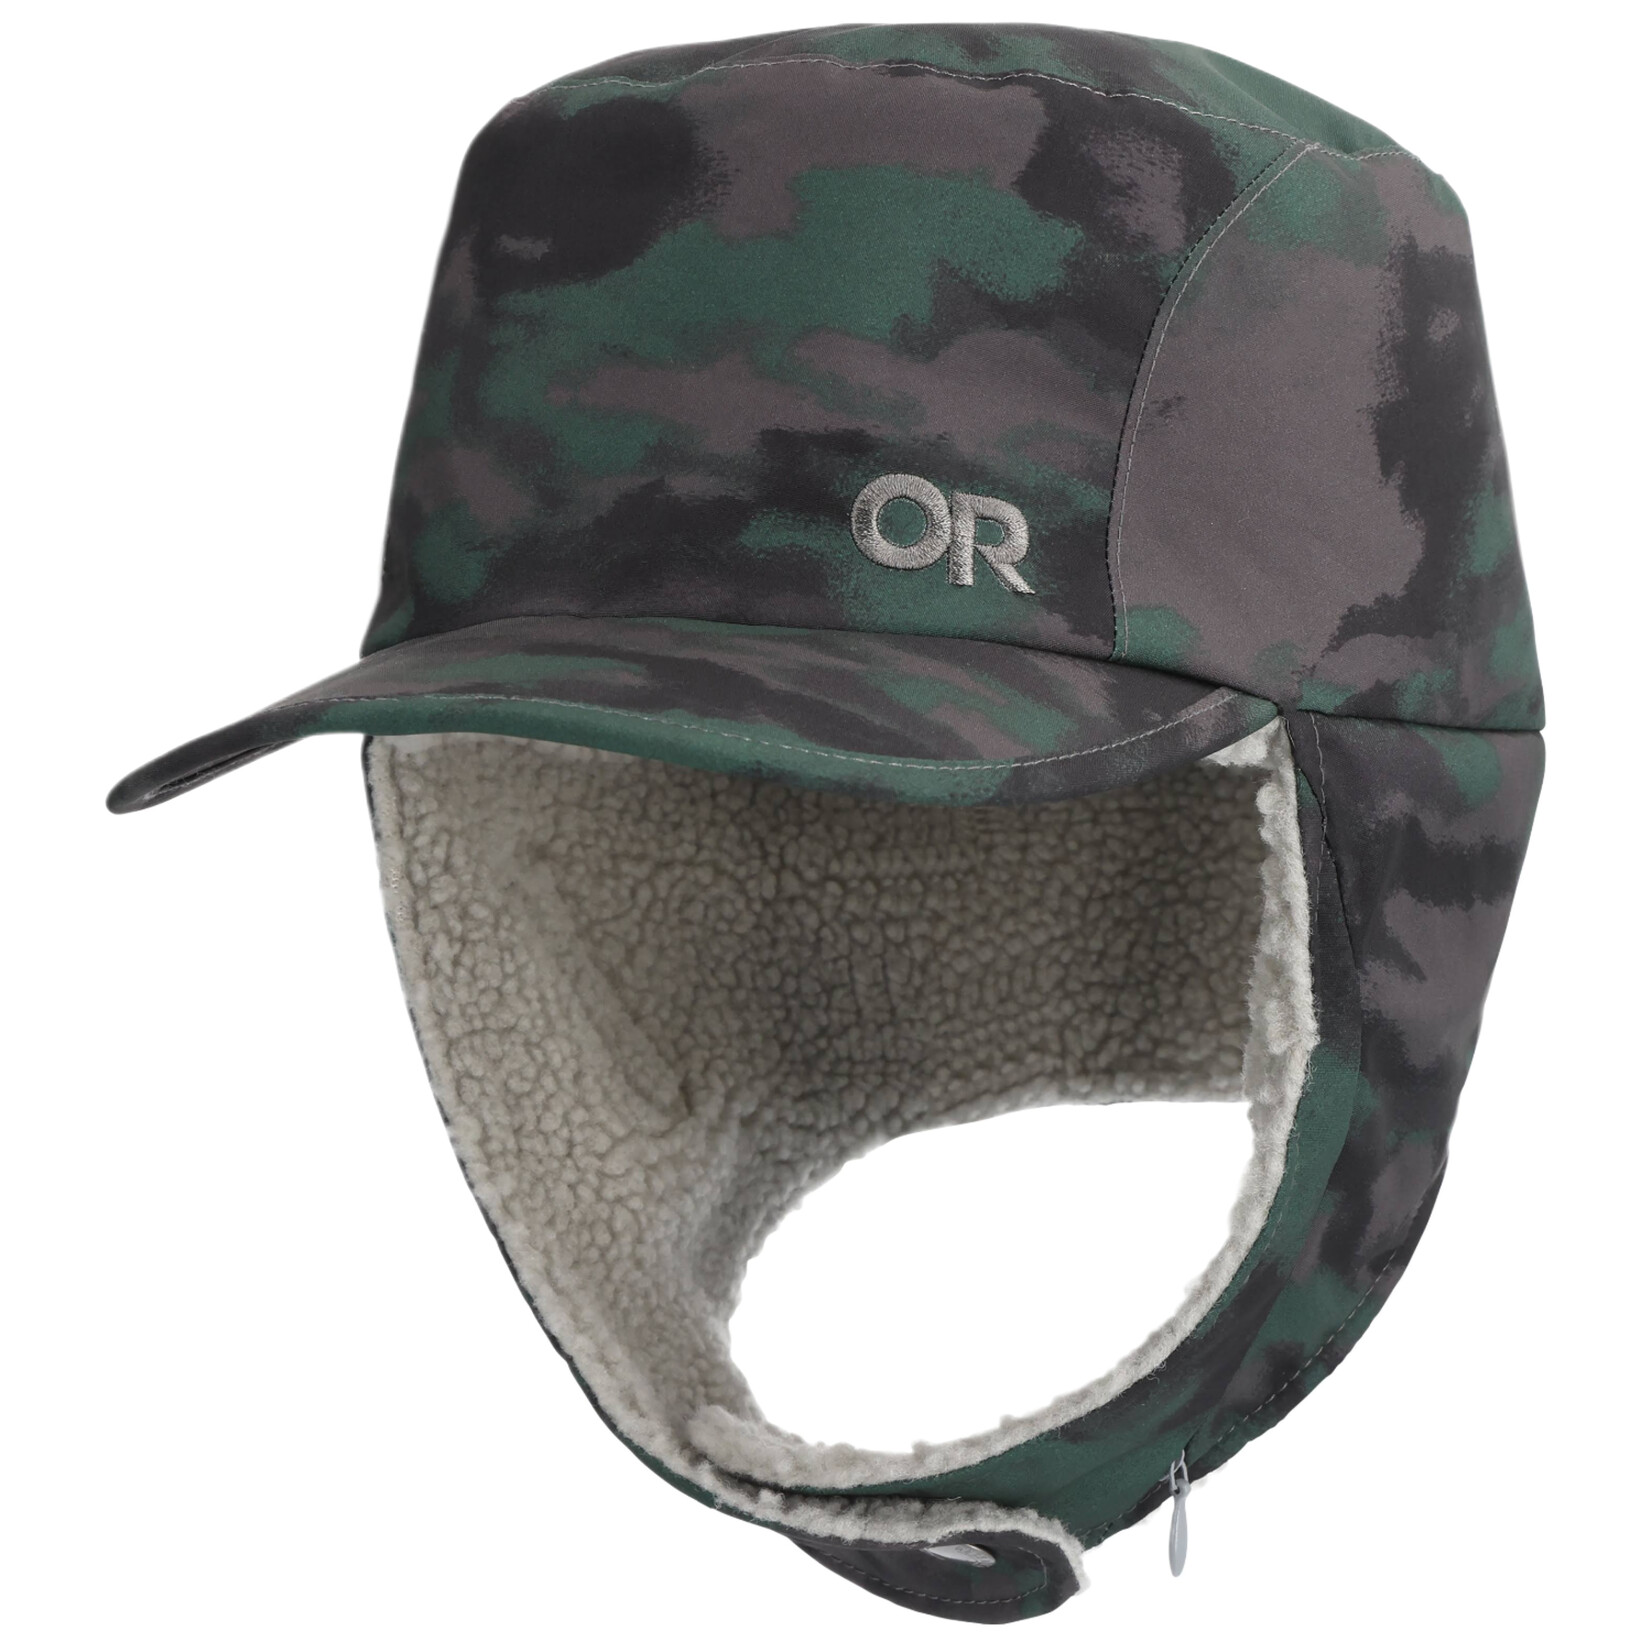 Outdoor Research Whitefish hat